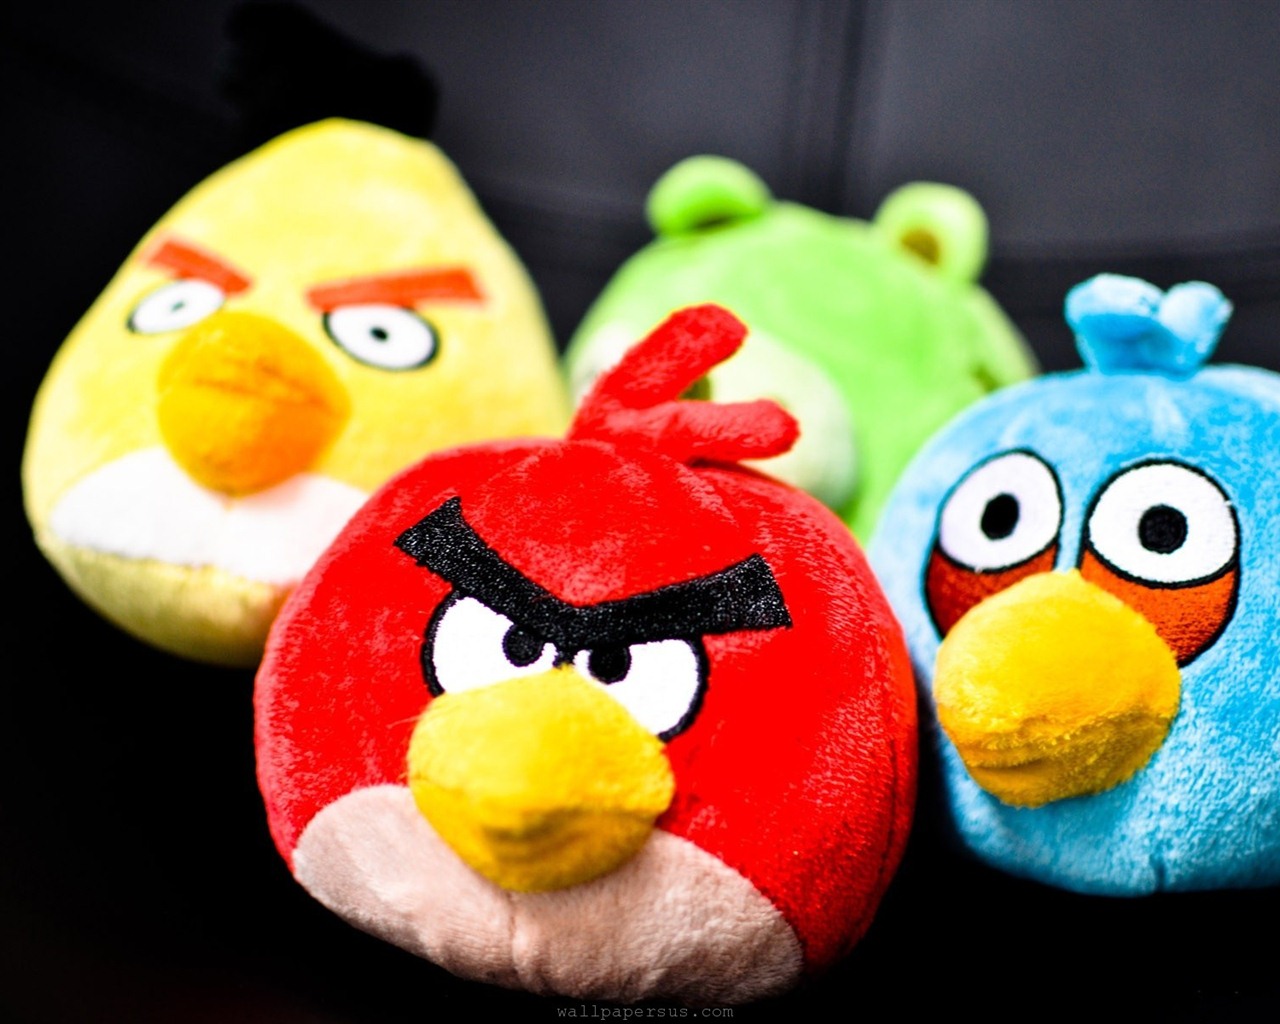 Angry Birds Game Wallpapers #16 - 1280x1024